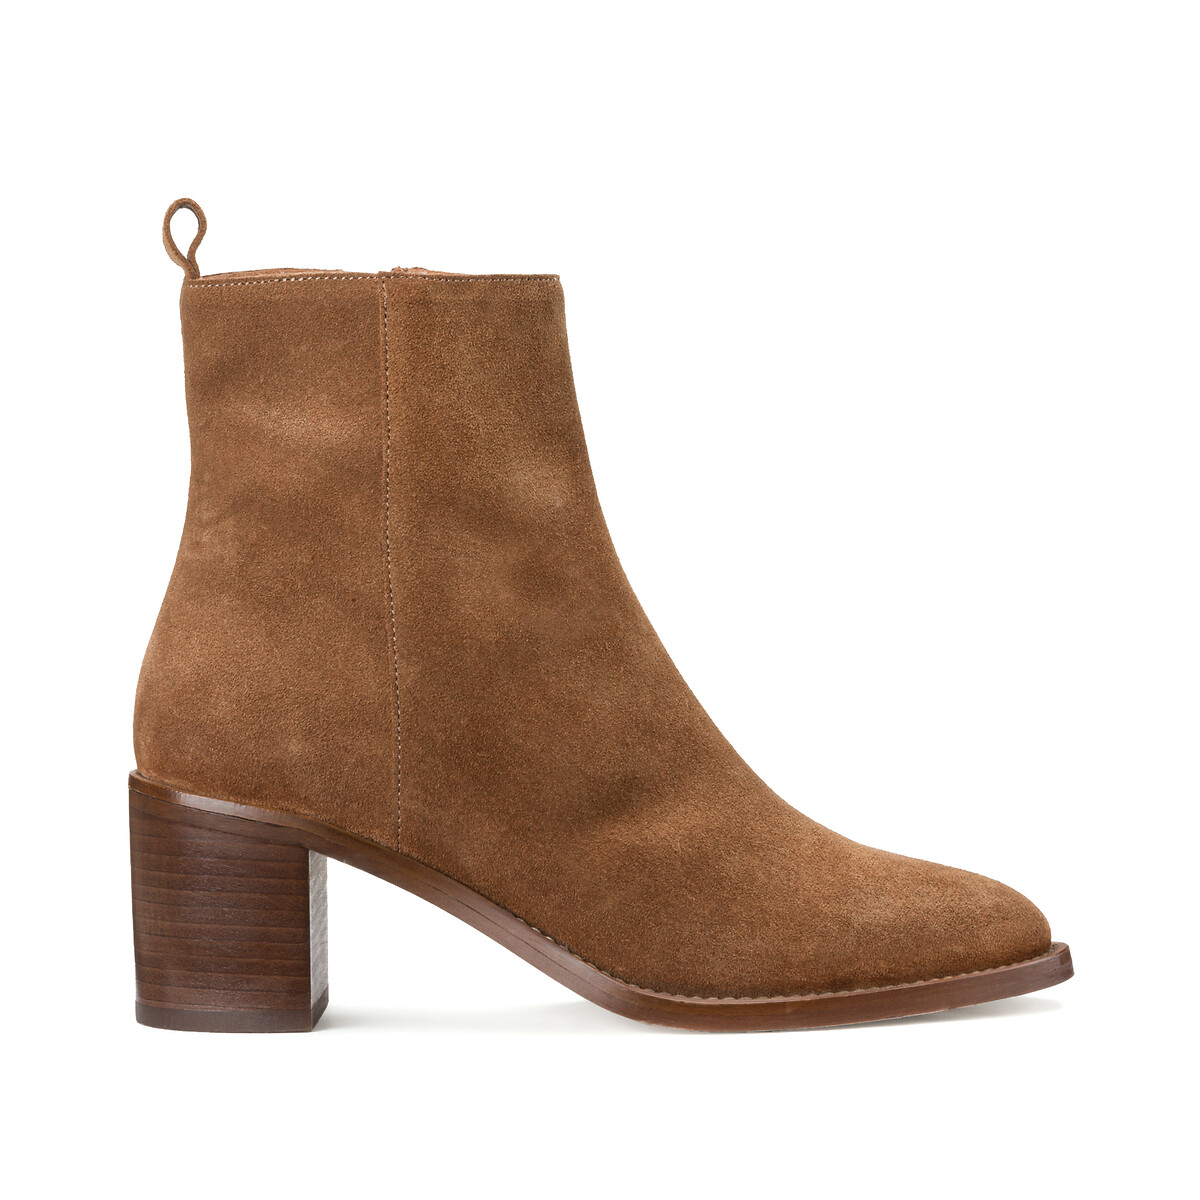 Les Signatures - Suede Ankle Boots, Made in Europe